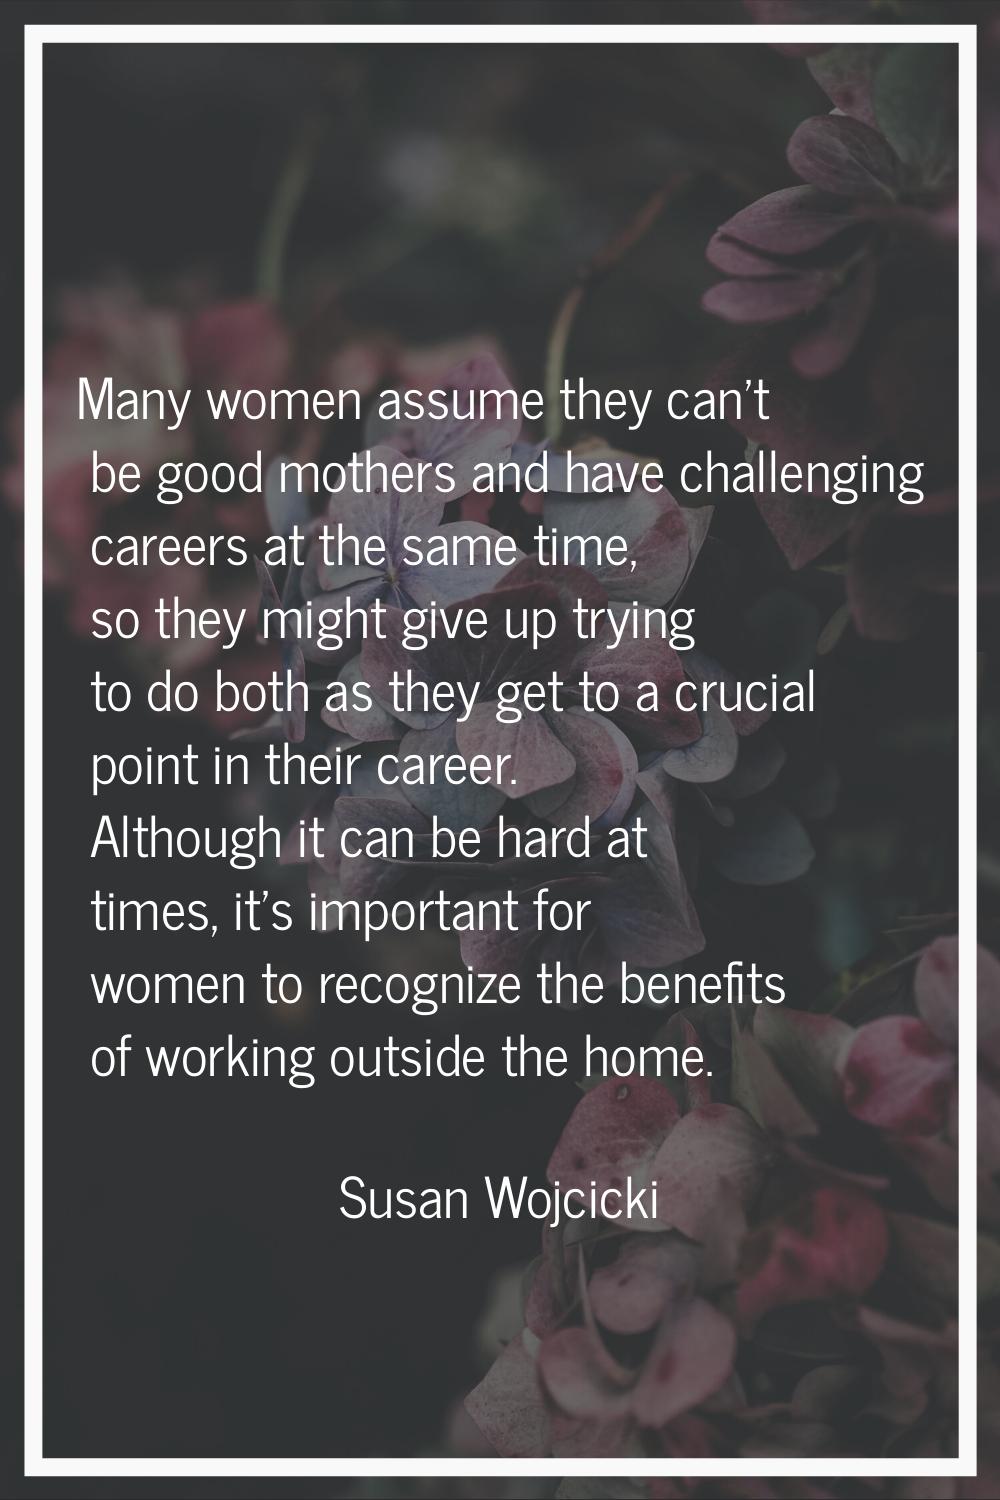 Many women assume they can't be good mothers and have challenging careers at the same time, so they